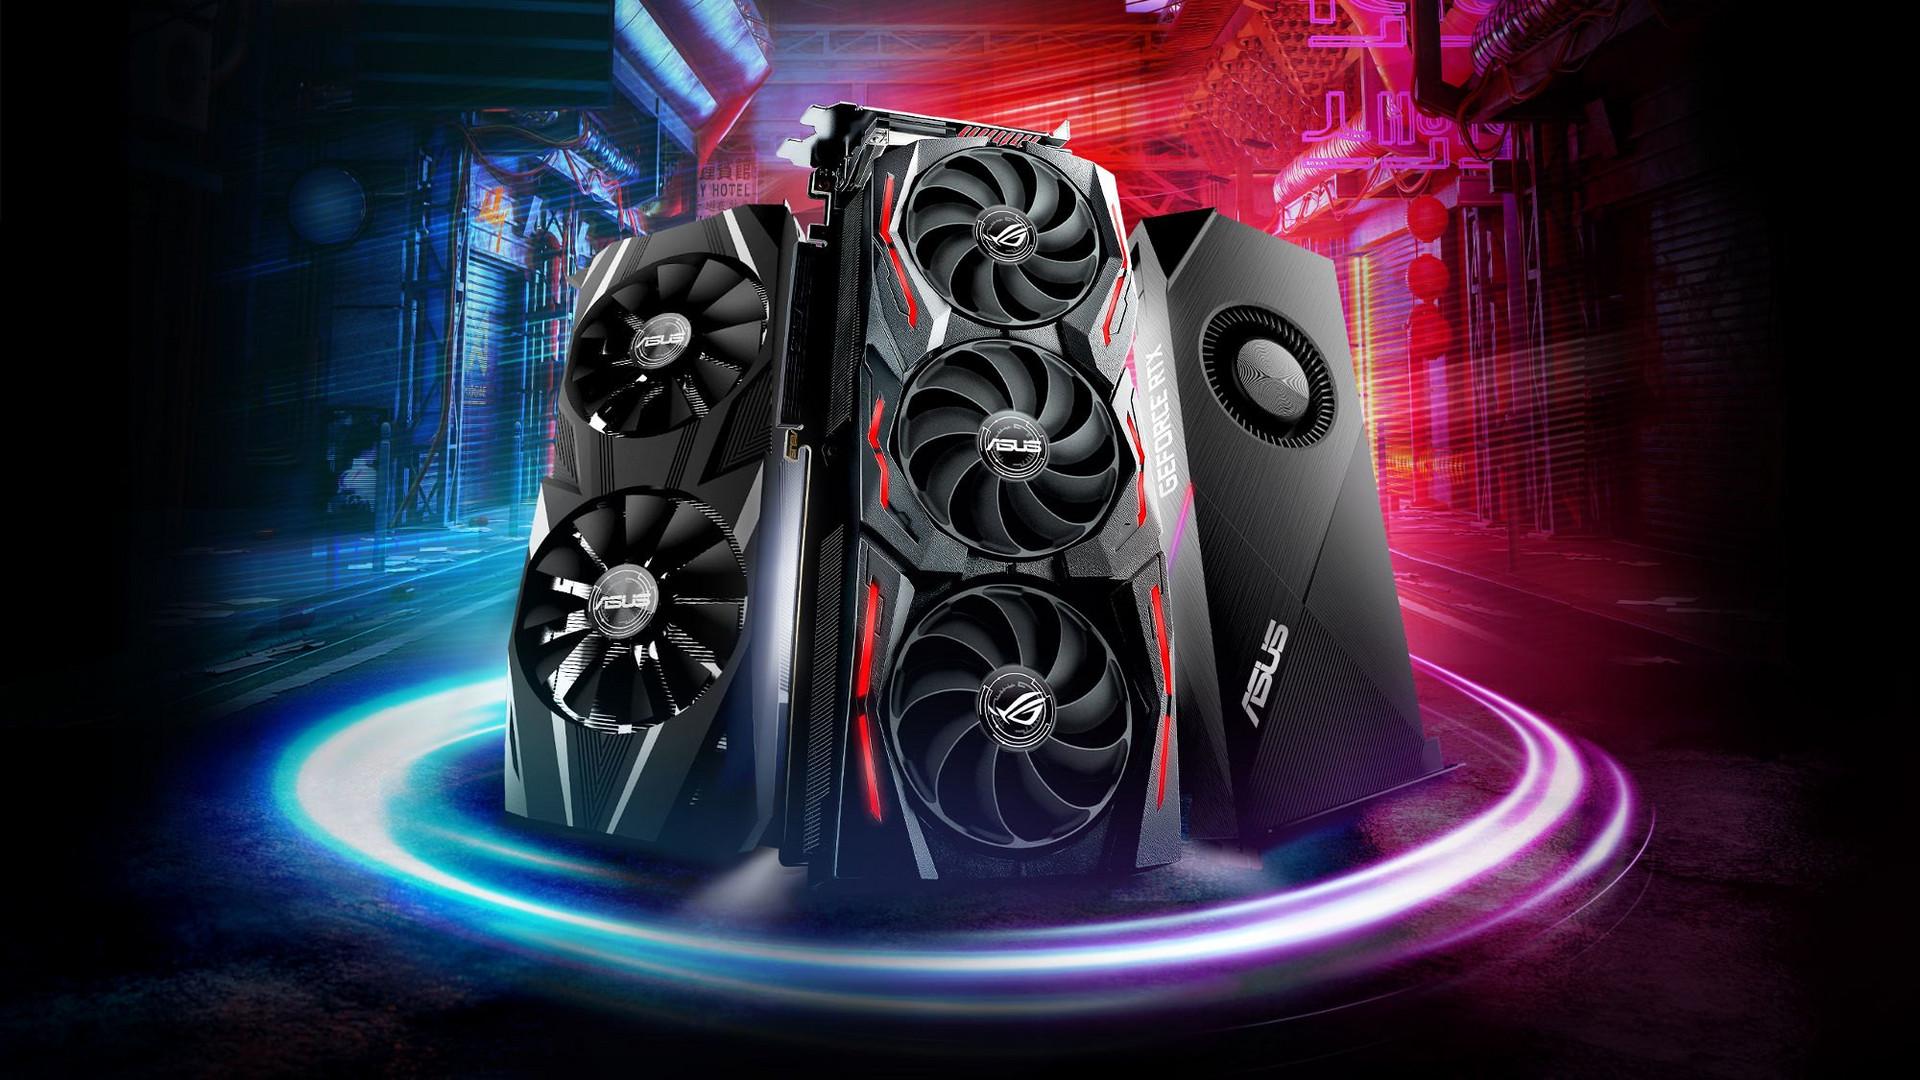 Asus will have three trims of the GeForce RTX 2070 coming next